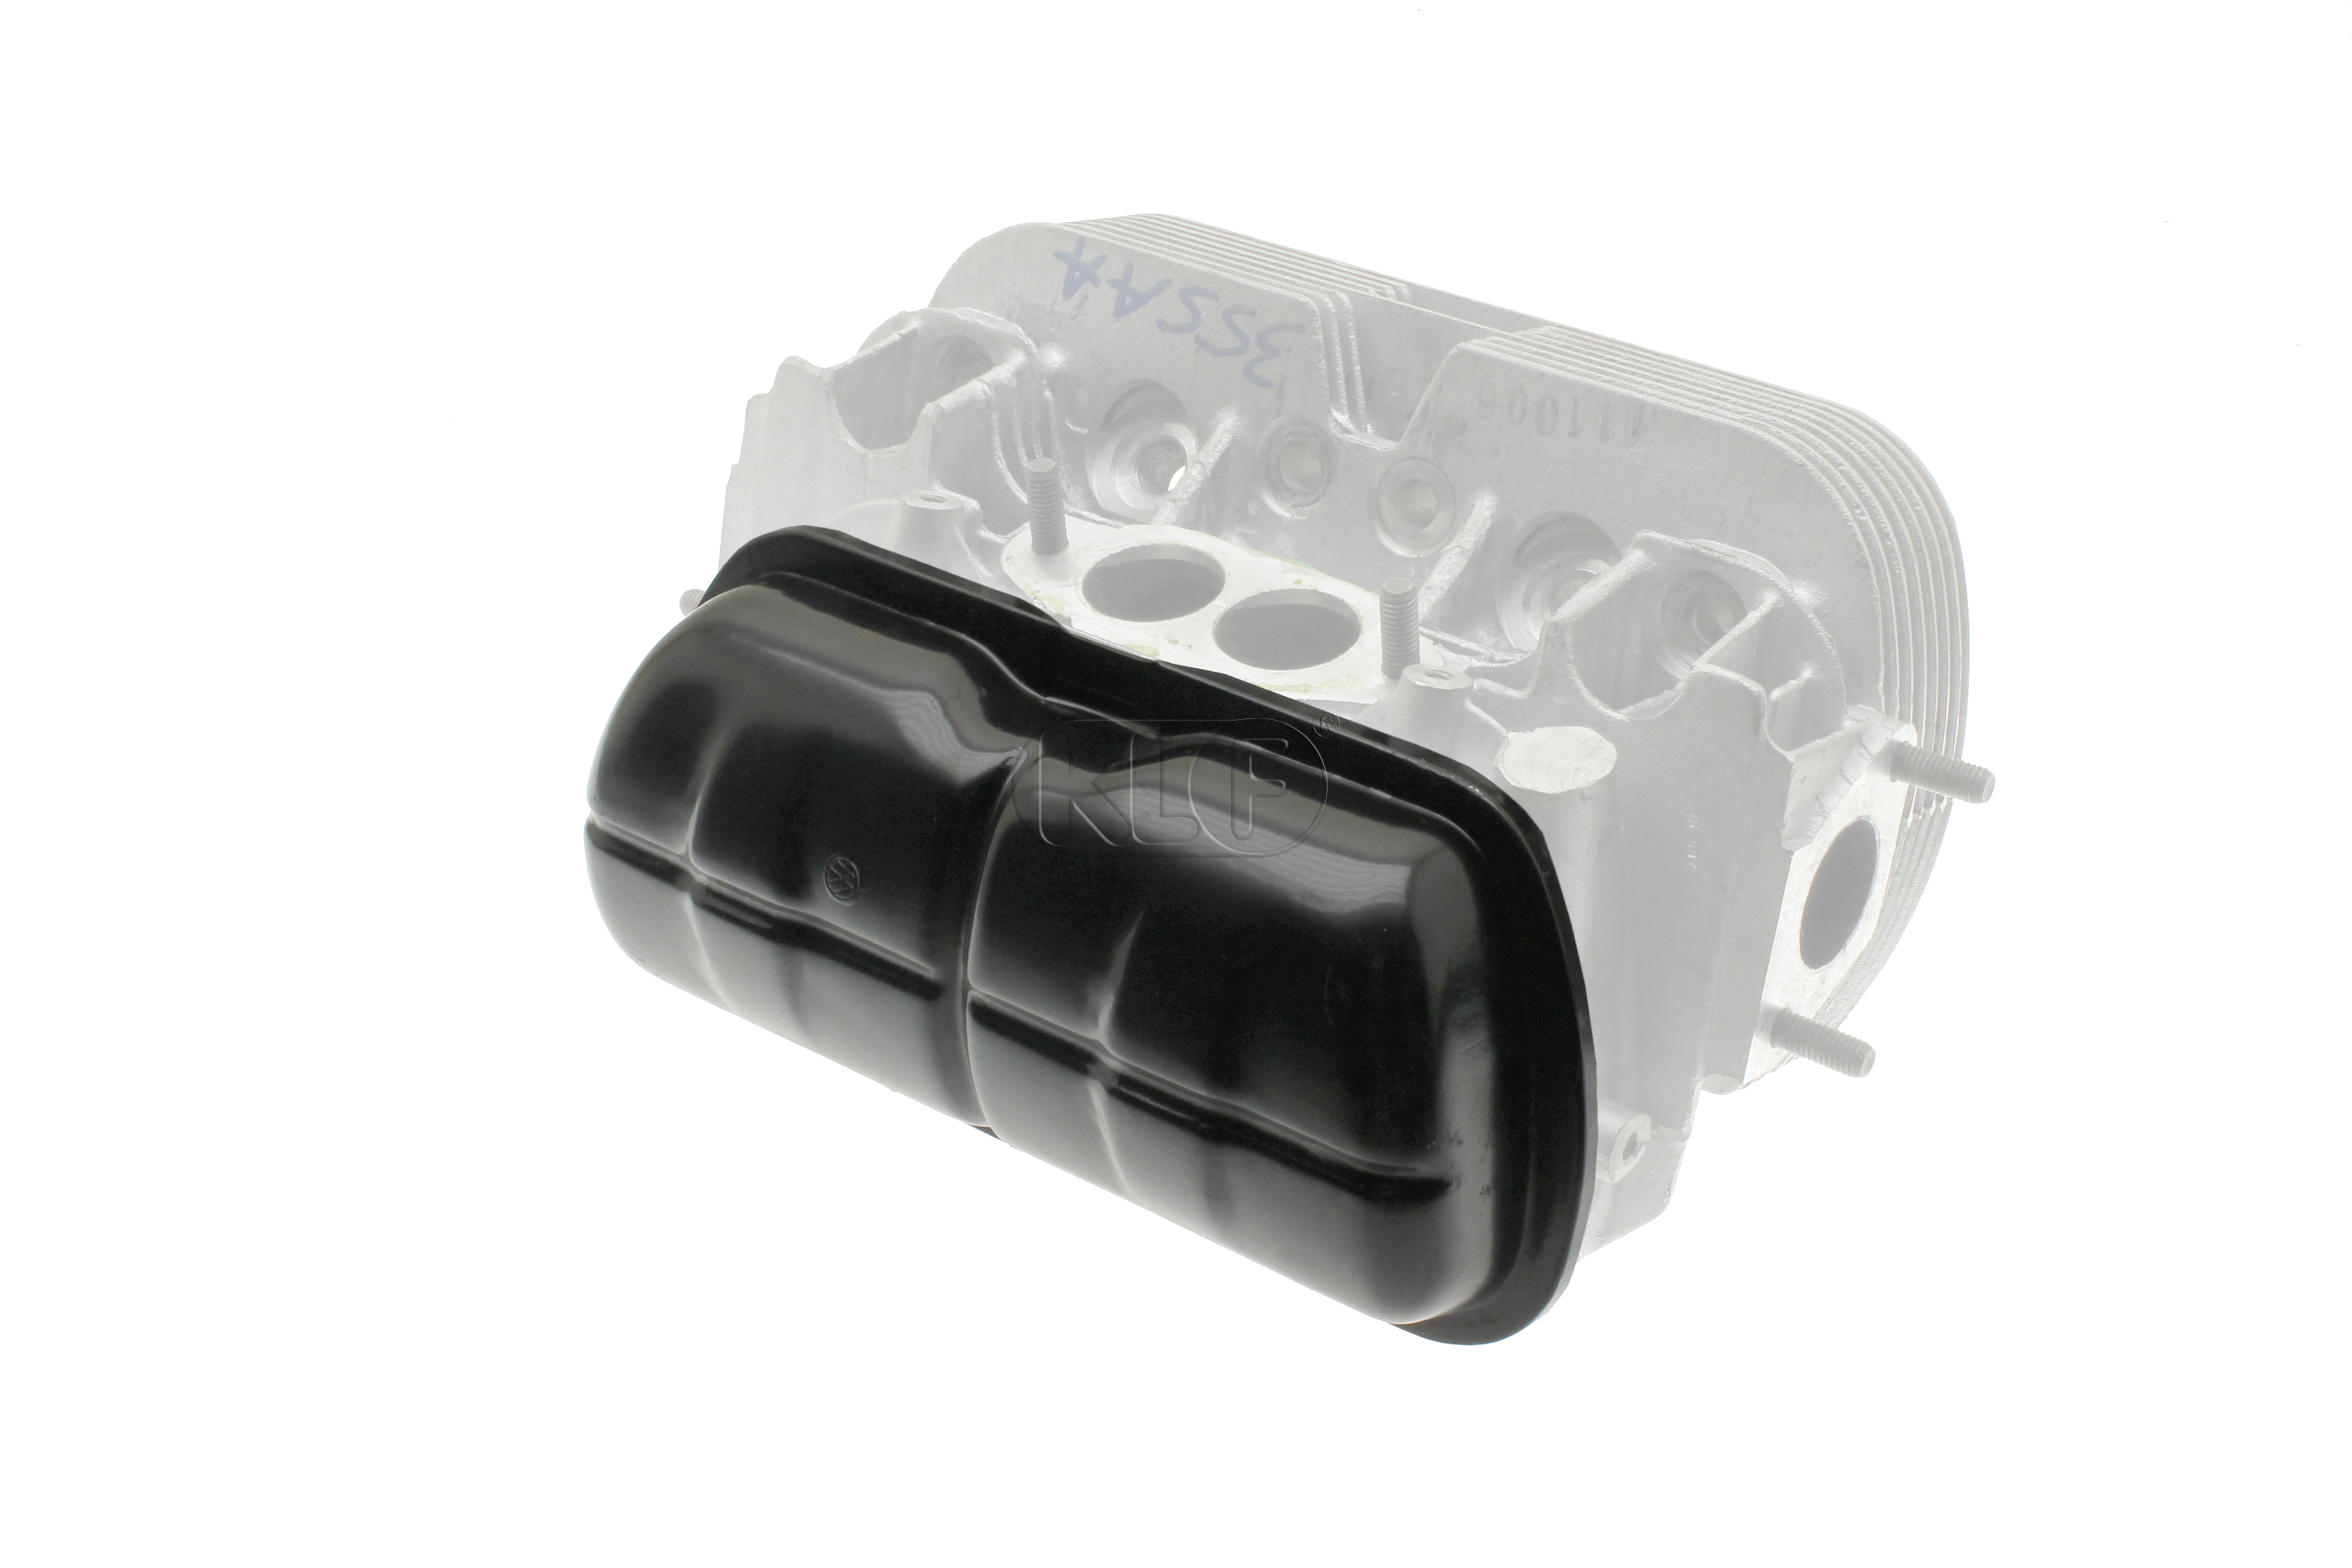 Valve Cover, black, Top Quality, 25-37 kW (34-50 PS)